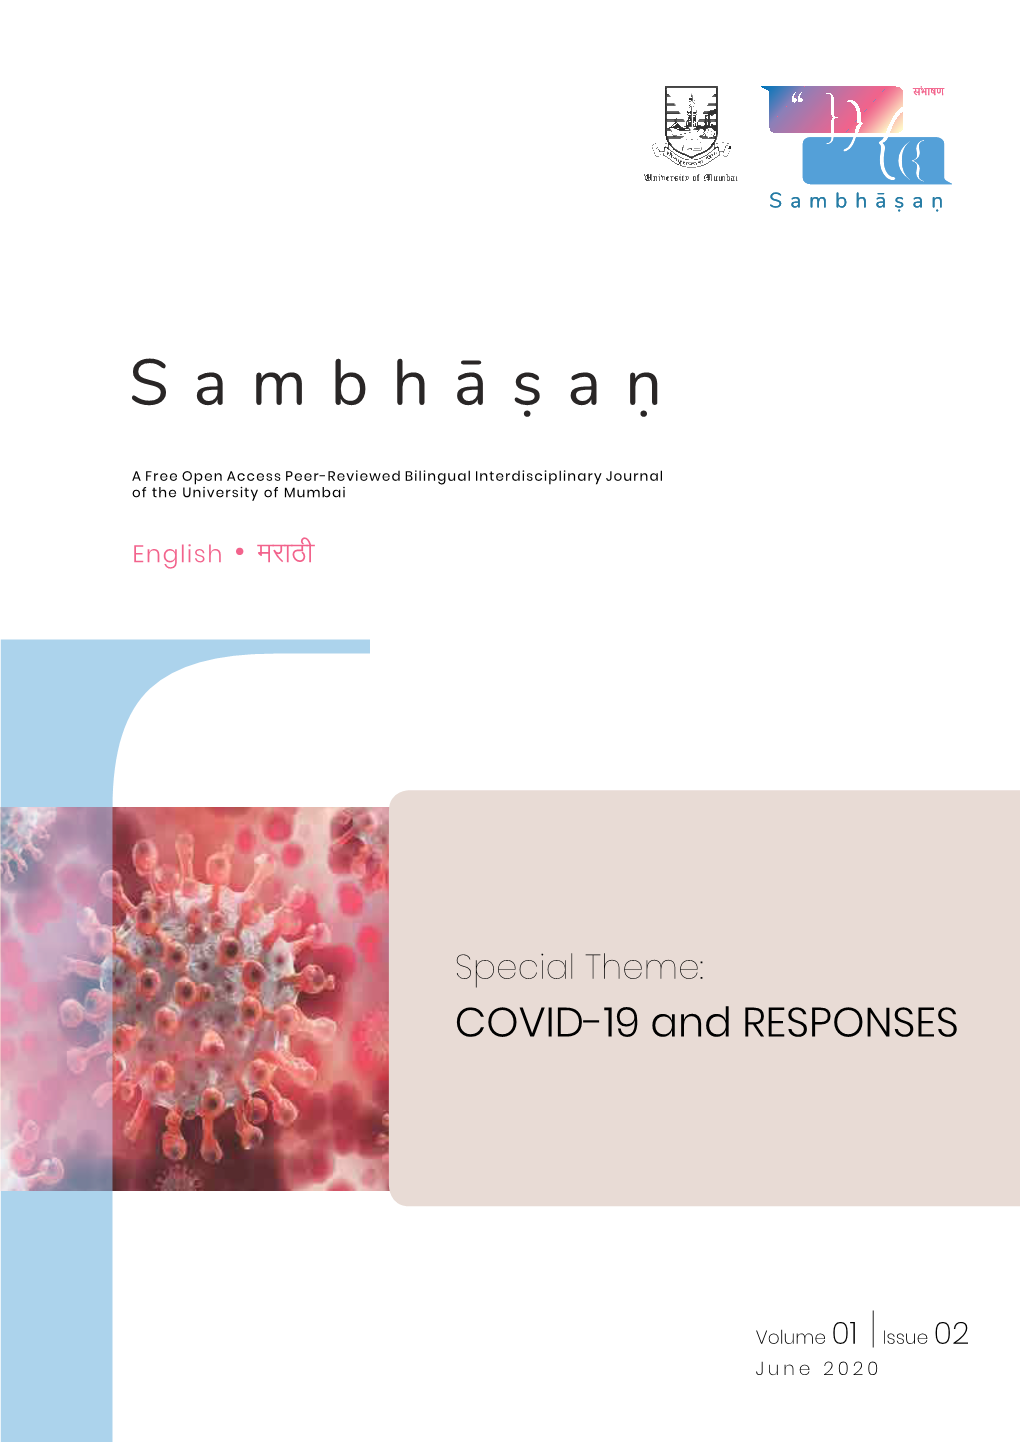 COVID-19 and RESPONSES